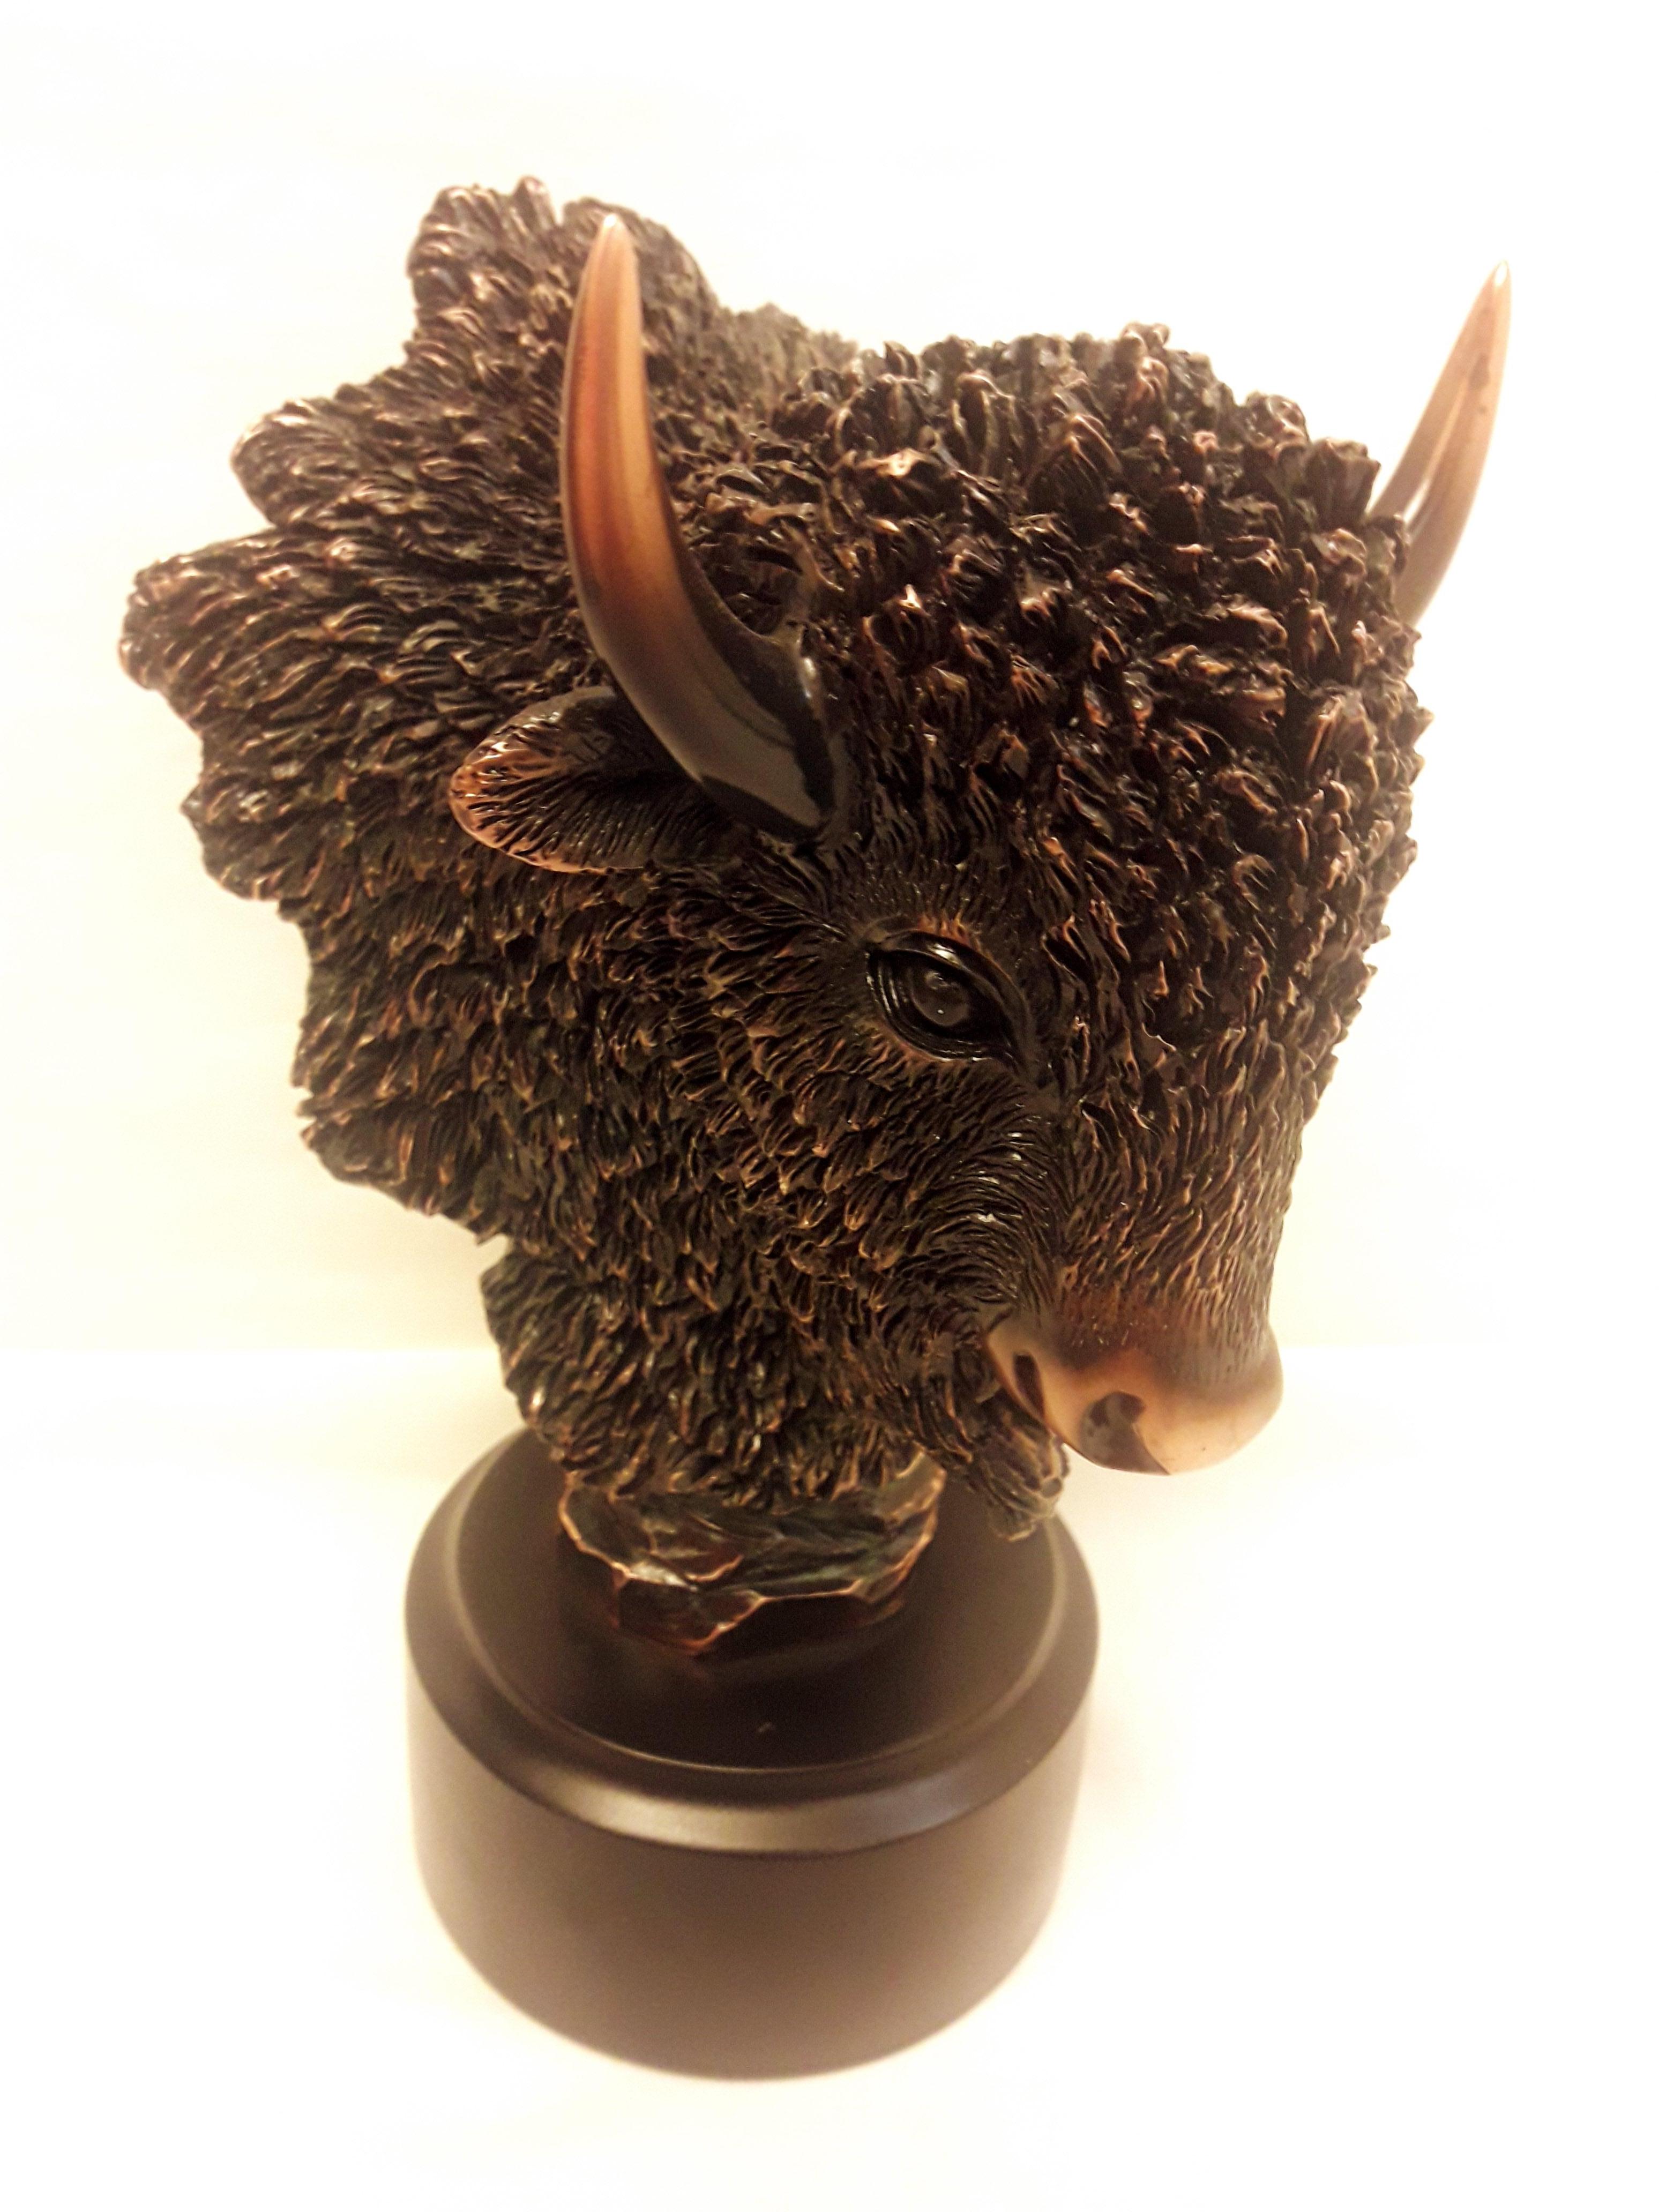 Arts and Crafts Vitange Bison Head Sculpture Copper Plated For Sale